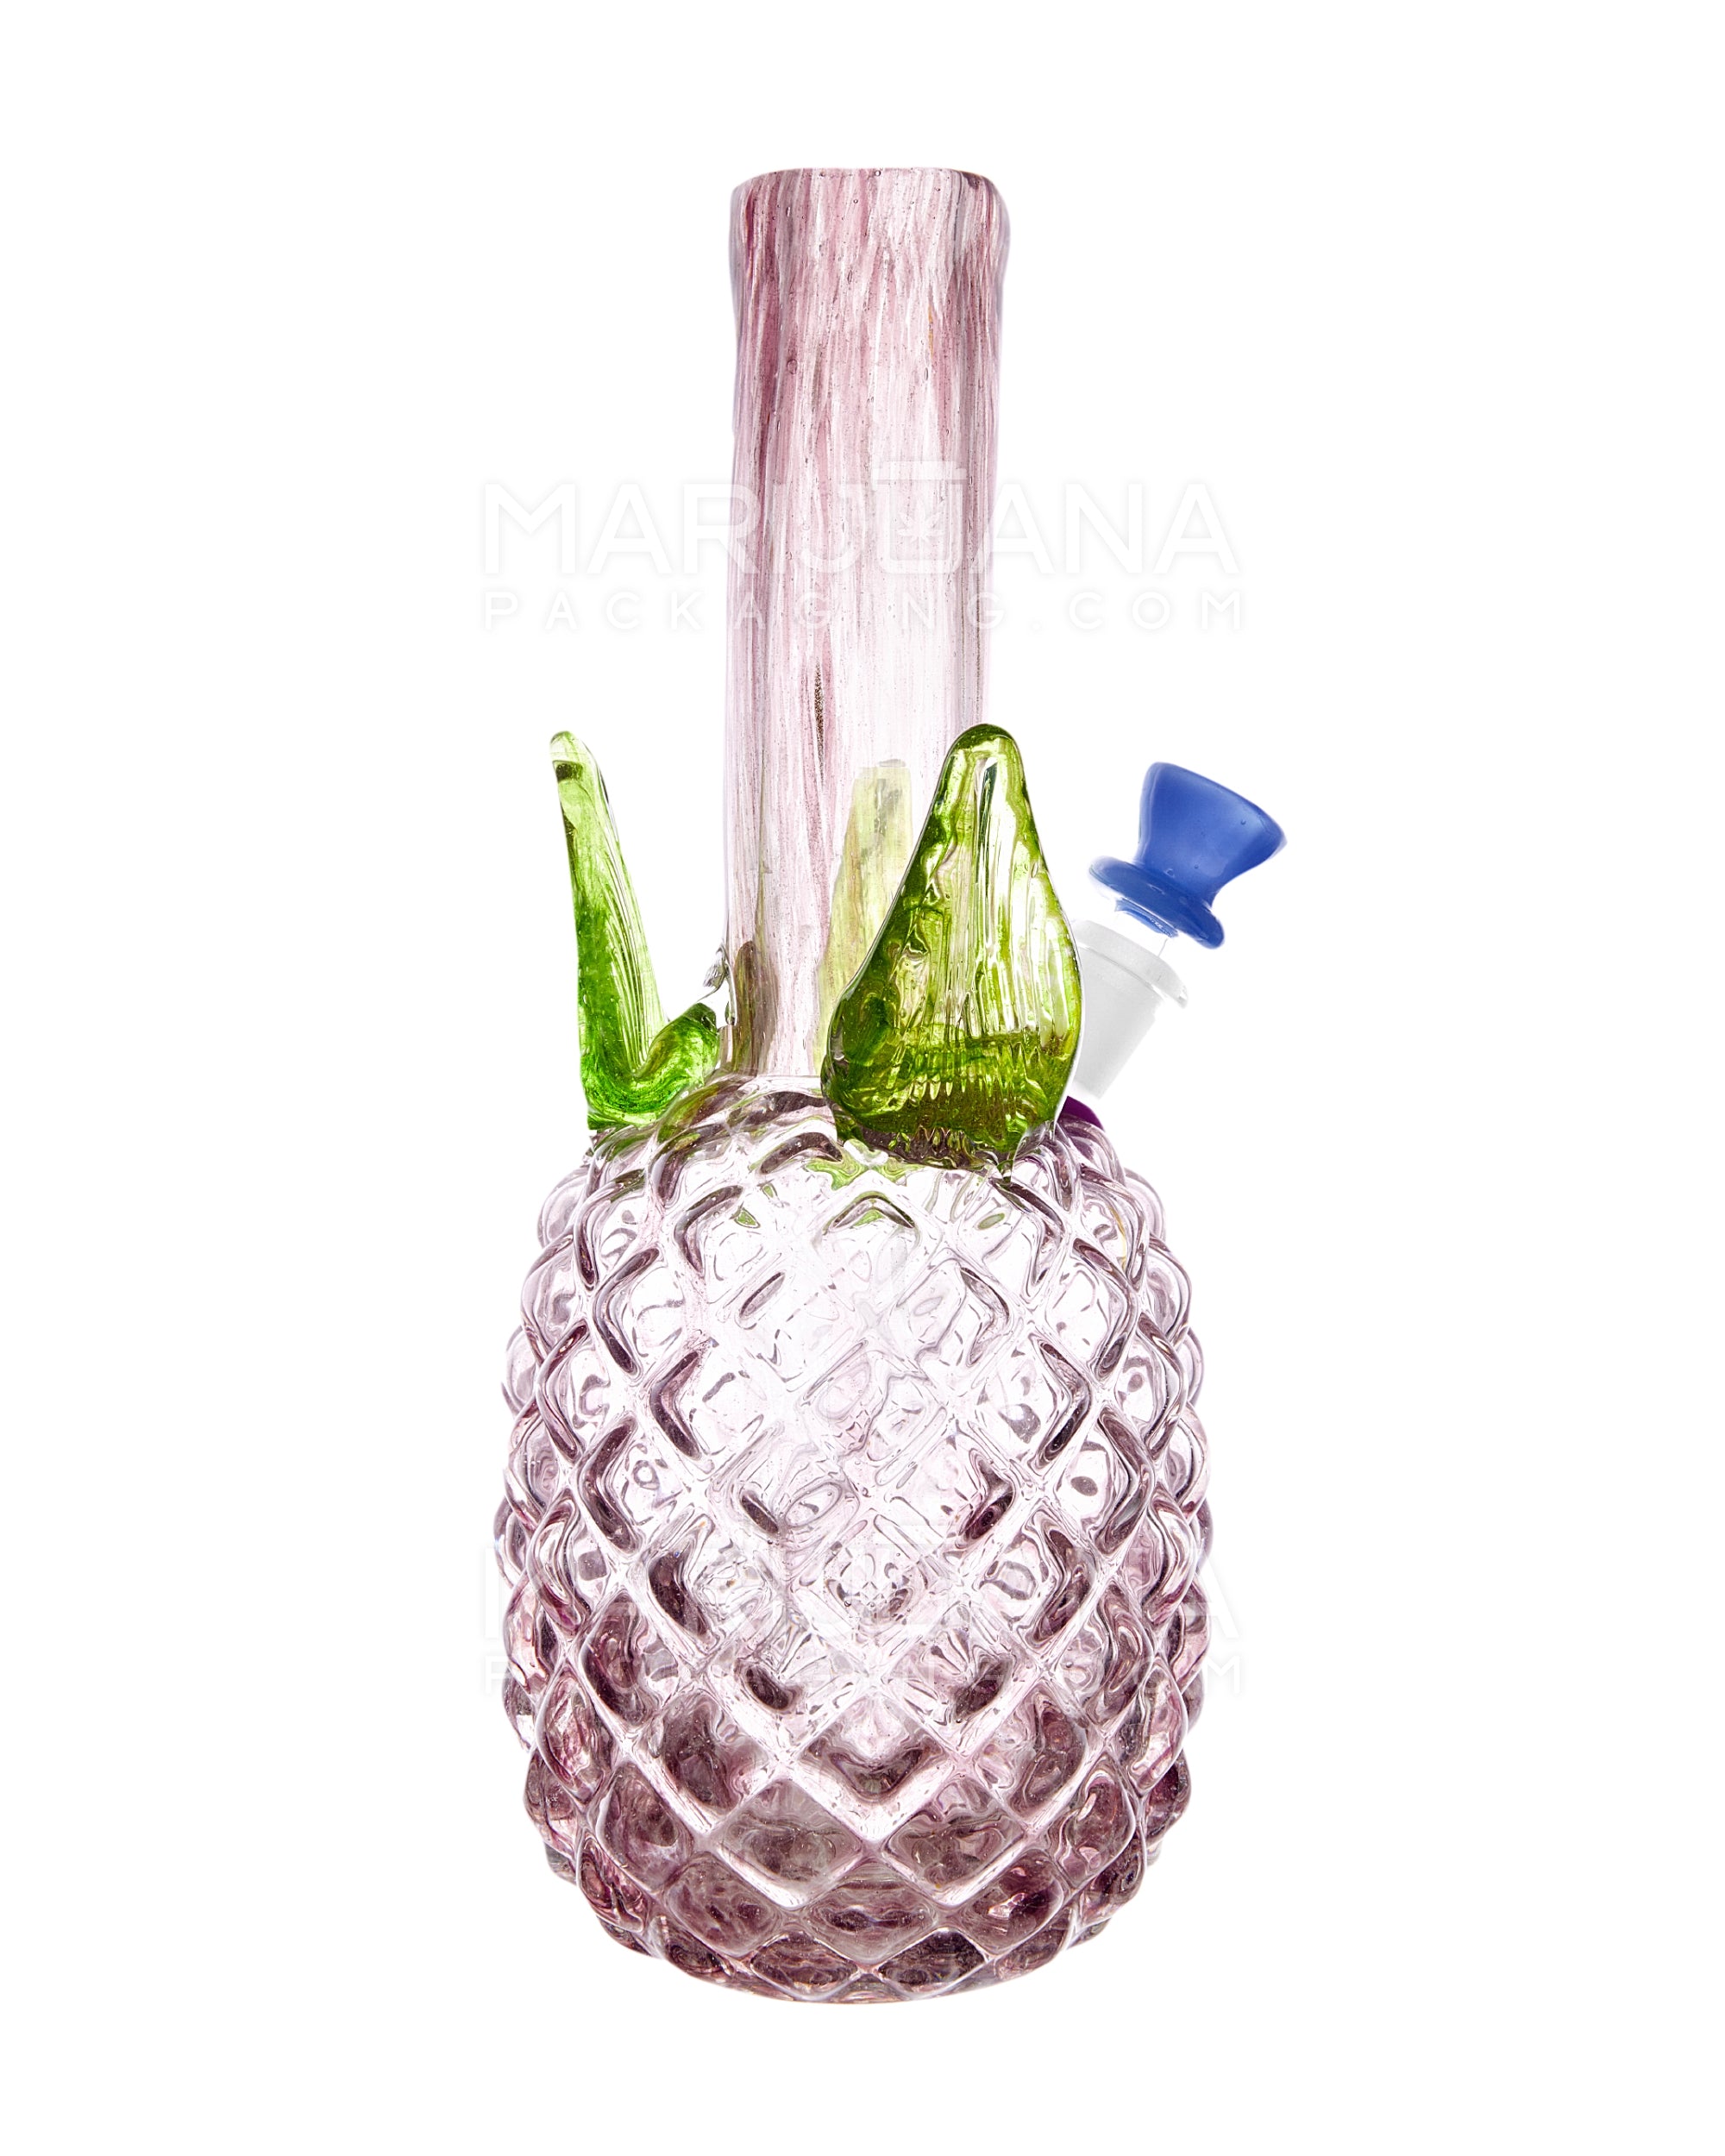 Straight Neck Color Pull Pineapple Glass Water Pipe | 12in Tall - 14mm Bowl - Purple